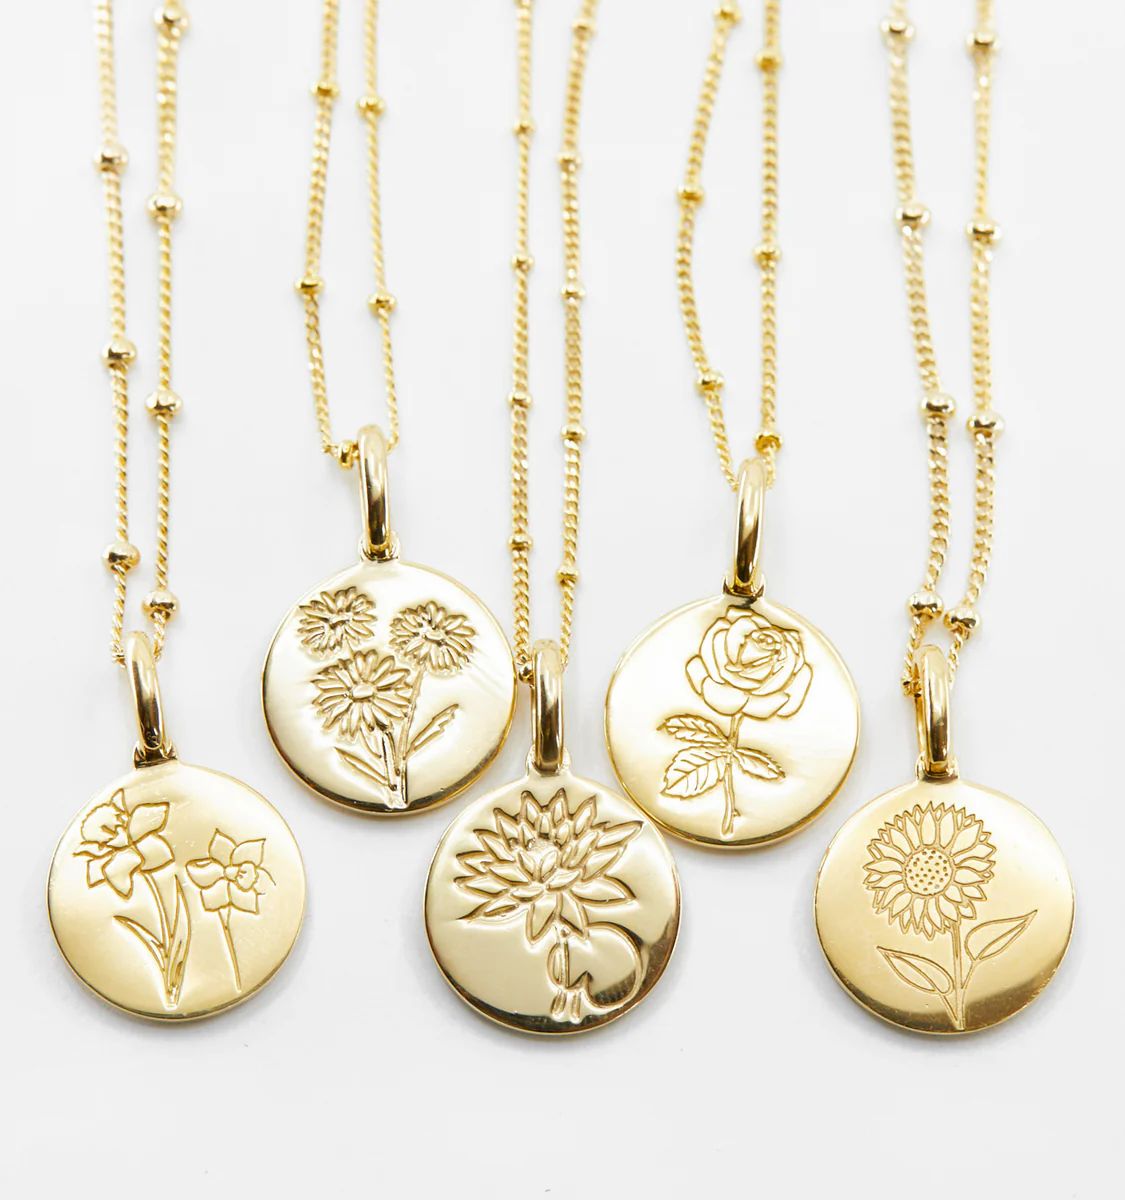 Birth Flower Necklaces | Rellery